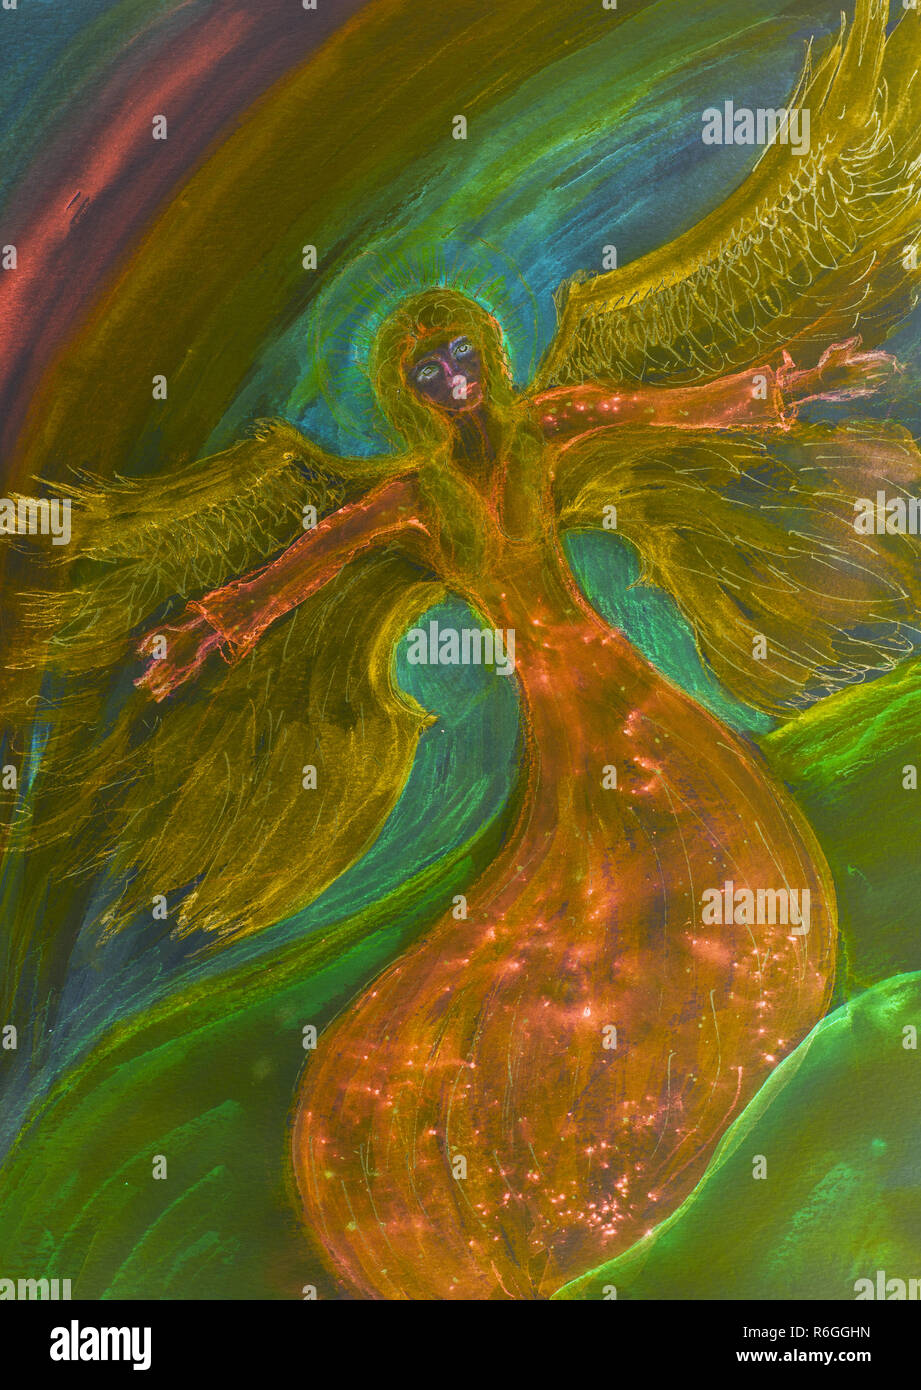 Psychedelic flying feminine angel. The dabbing technique near the edges gives a soft focus effect due to the altered surface roughness of the paper. Stock Photo